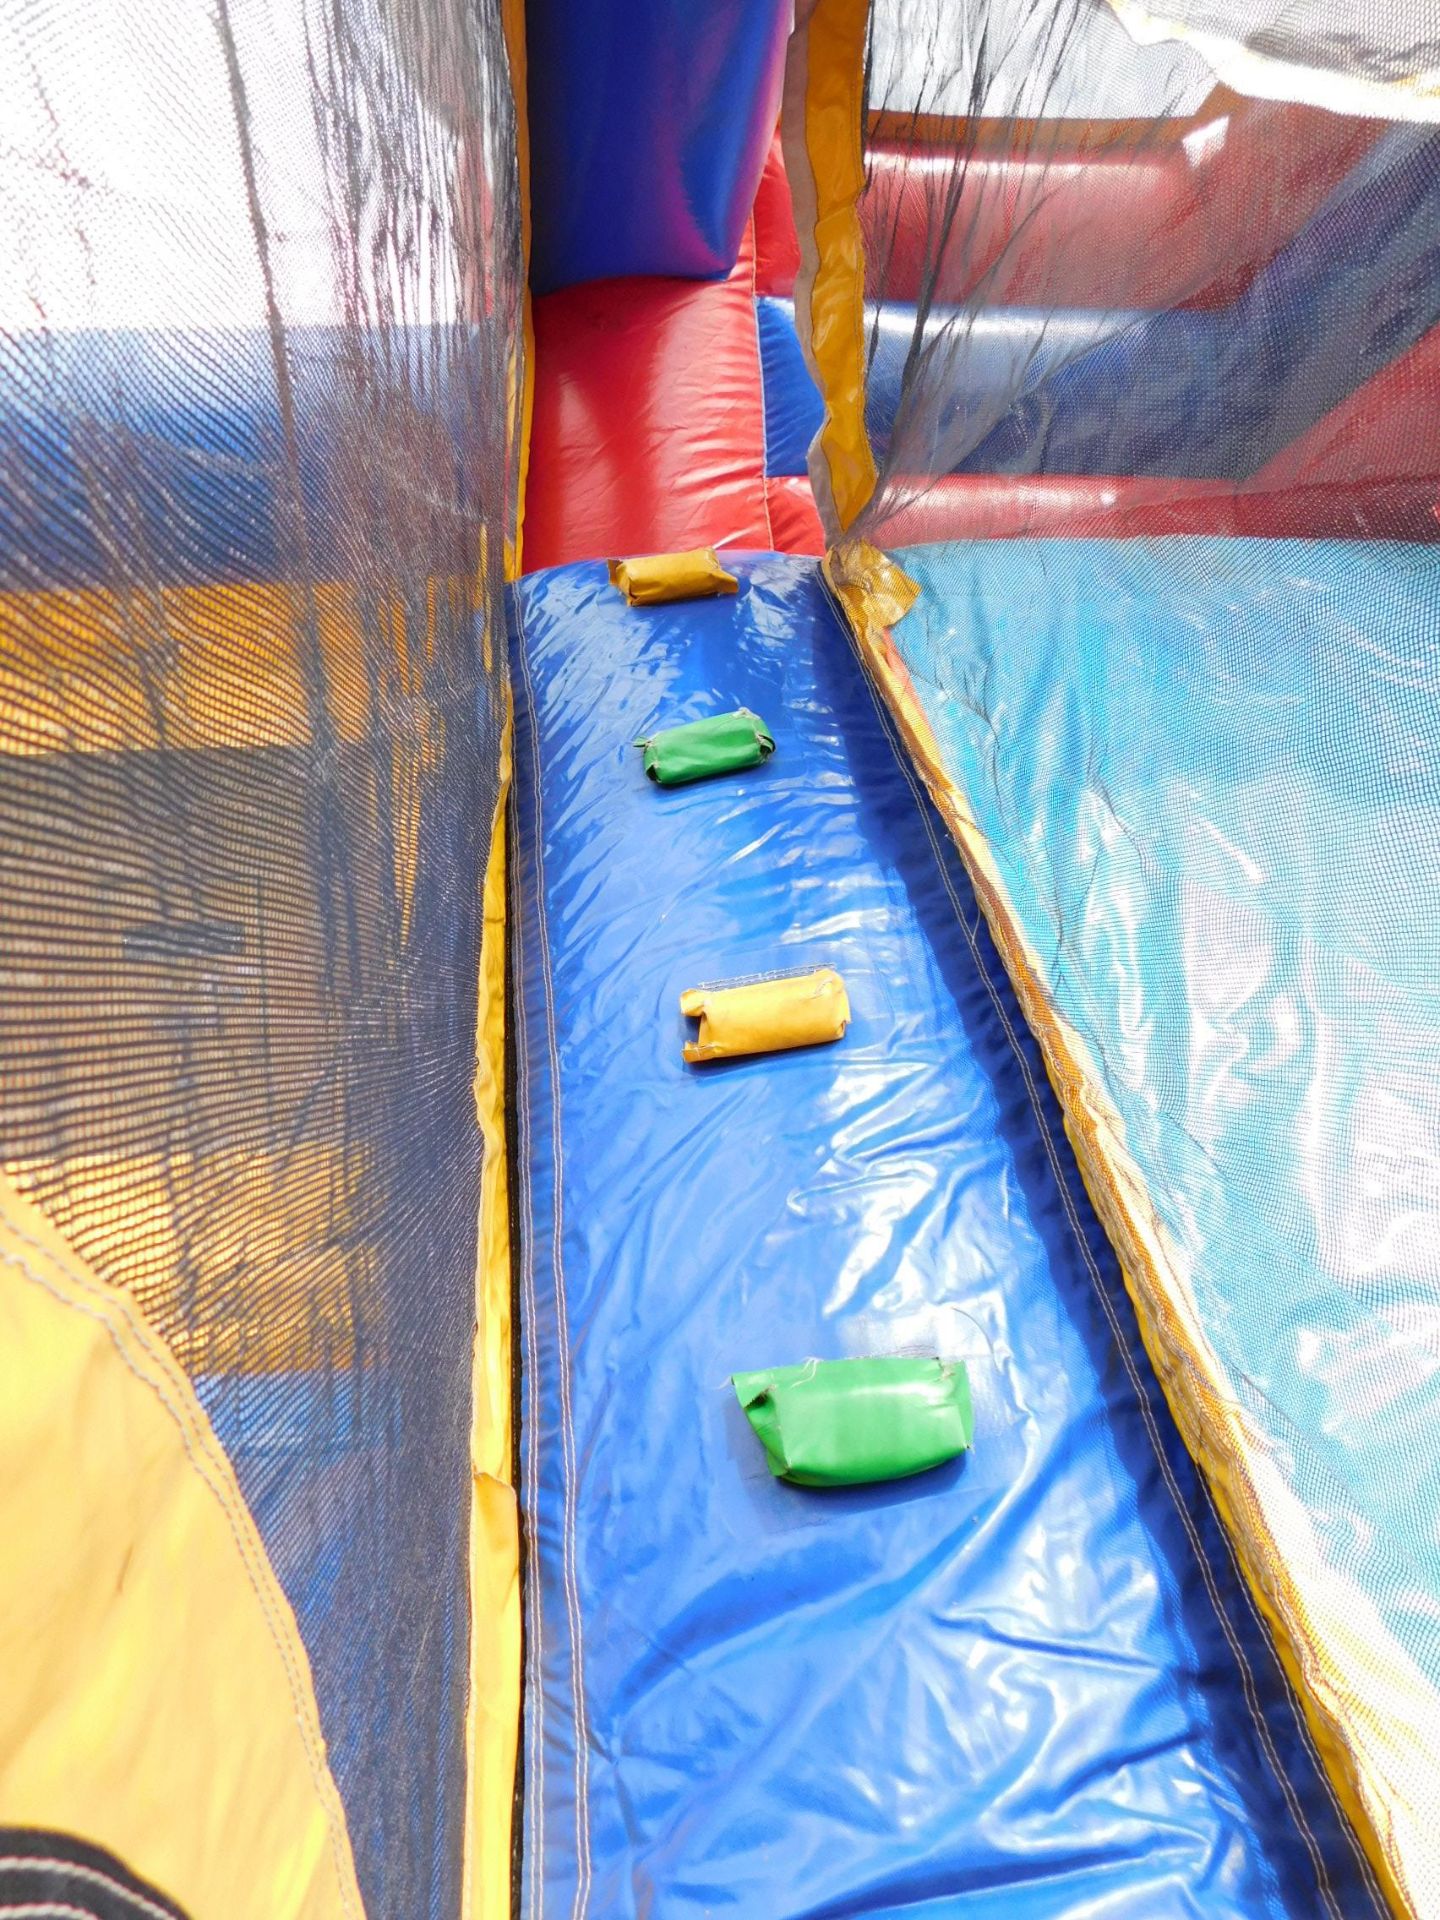 Sports Combo Bounce House w/Slide, 18'WX20'LX14'H, 2 blowers req. - Image 19 of 19